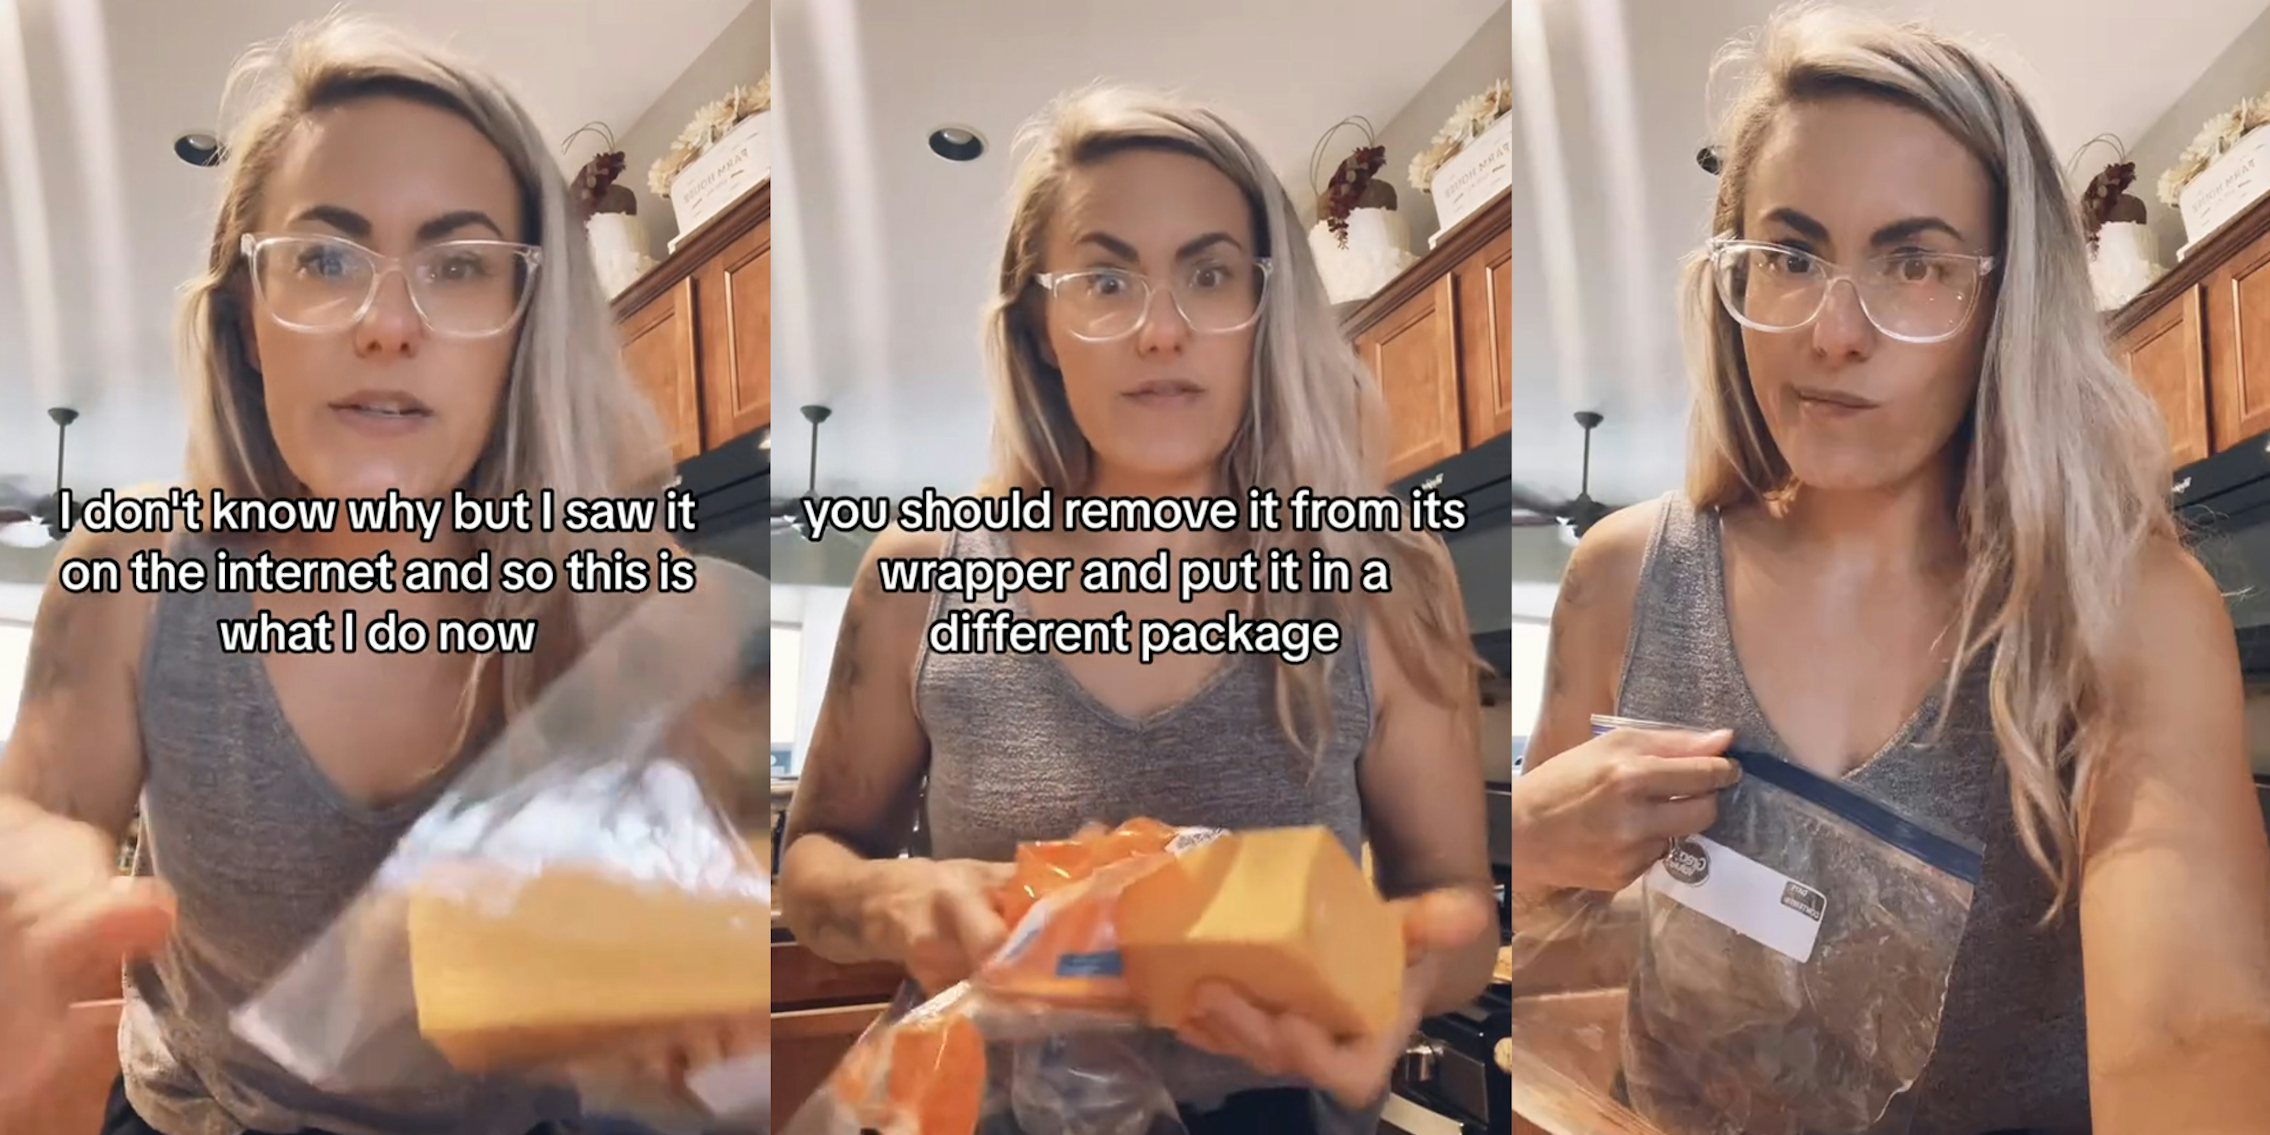 Customer puts block of cheese into Ziploc once she opens it